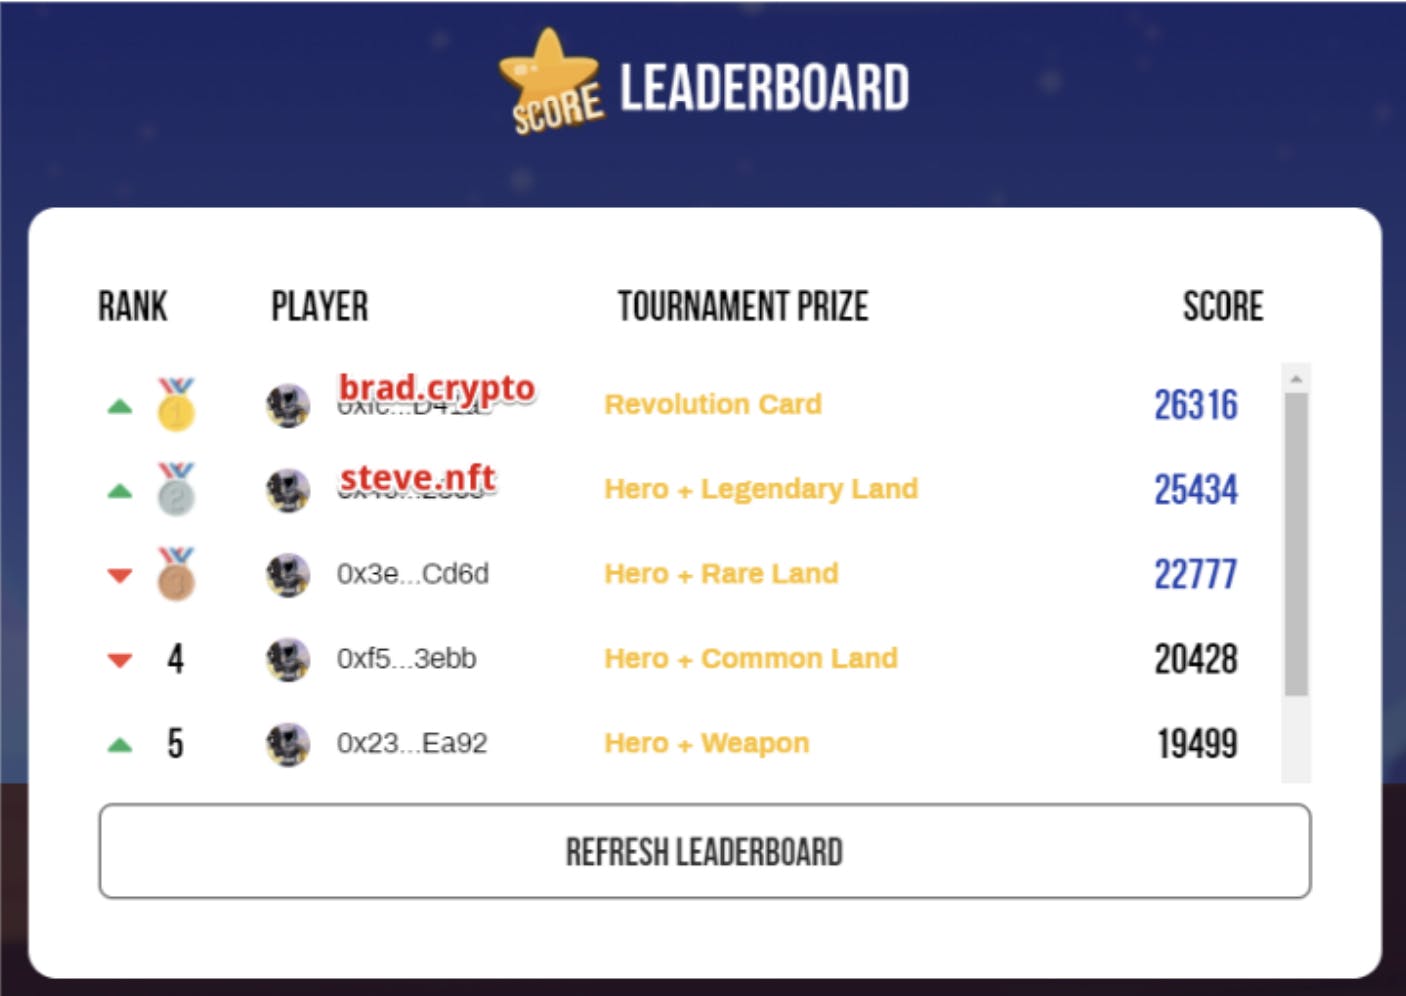 In-game leaderboard using Unstoppable Domain as display name